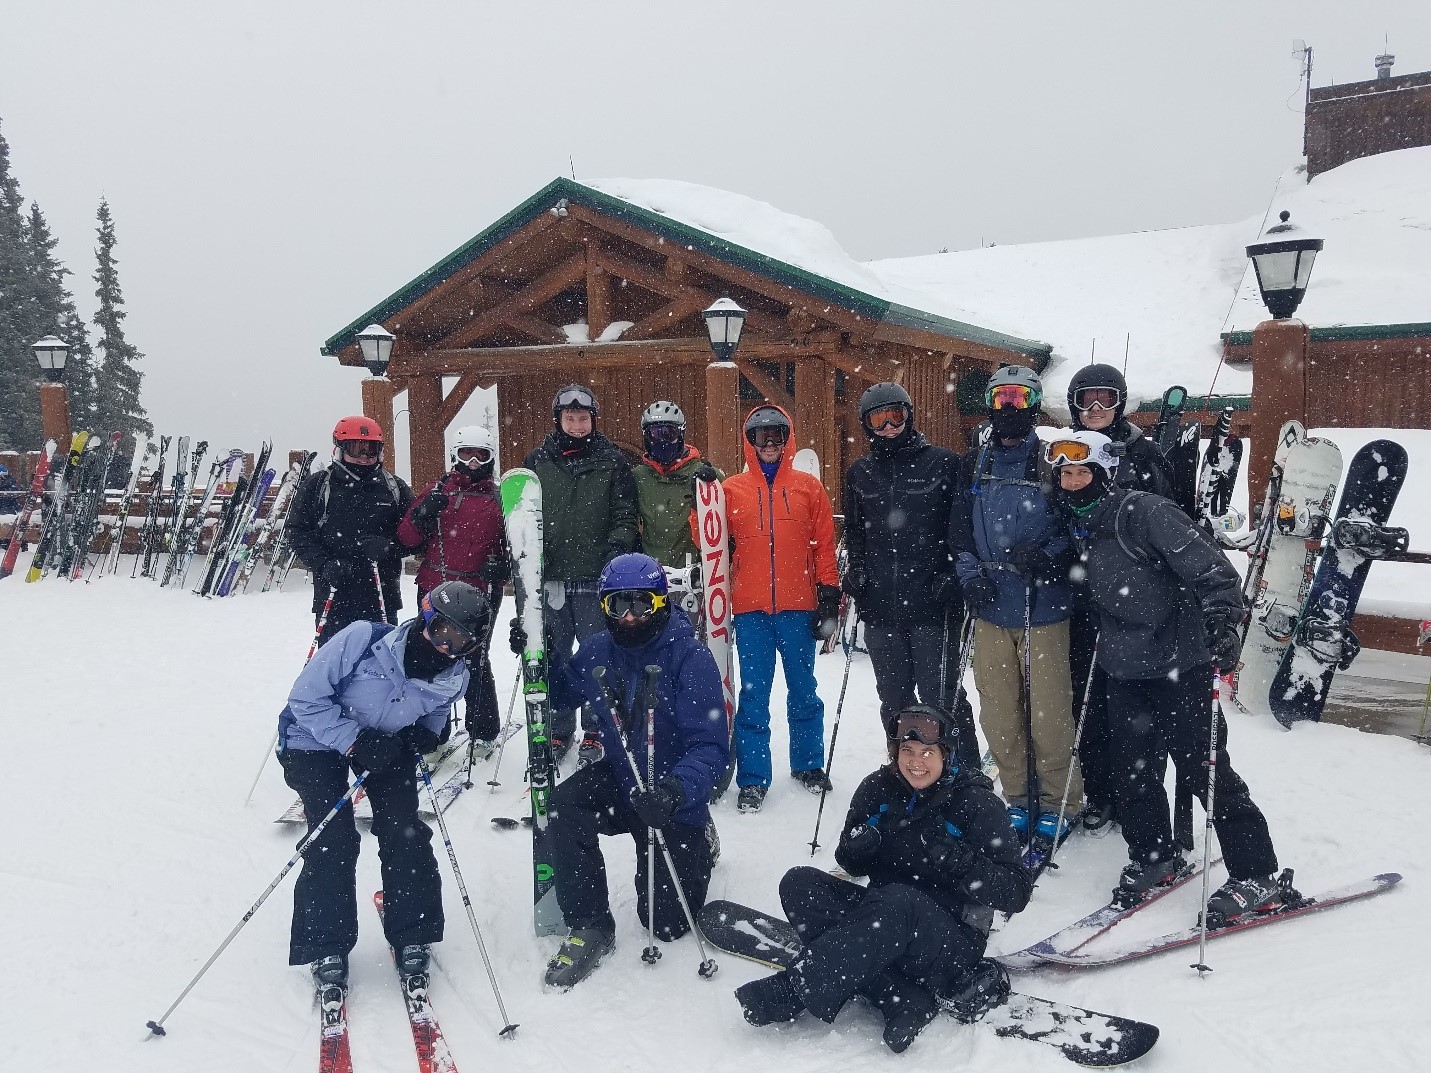 Group photo of skiers.